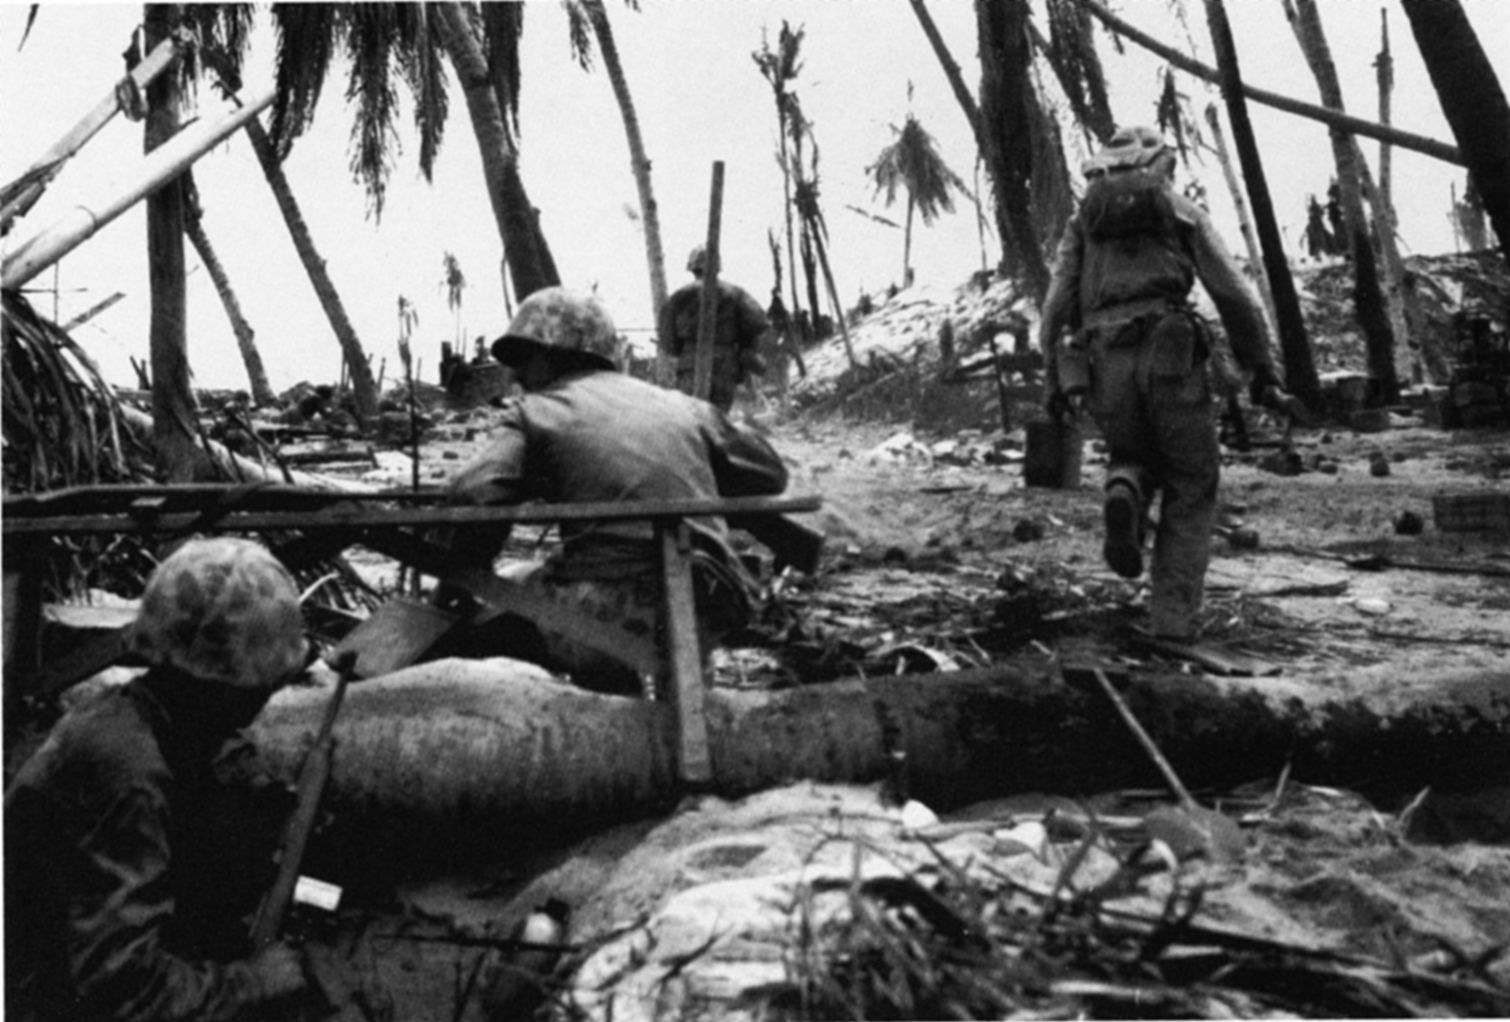 The fighting on Betio was ferocious, and Marines often measured their gains in yards. Small teams of Marines methodically assaulted Japanese strongpoints on the islet and opened the way for offensive operations Here, a group of Marines braves intense fire to attack a Japanese bunker (background). 